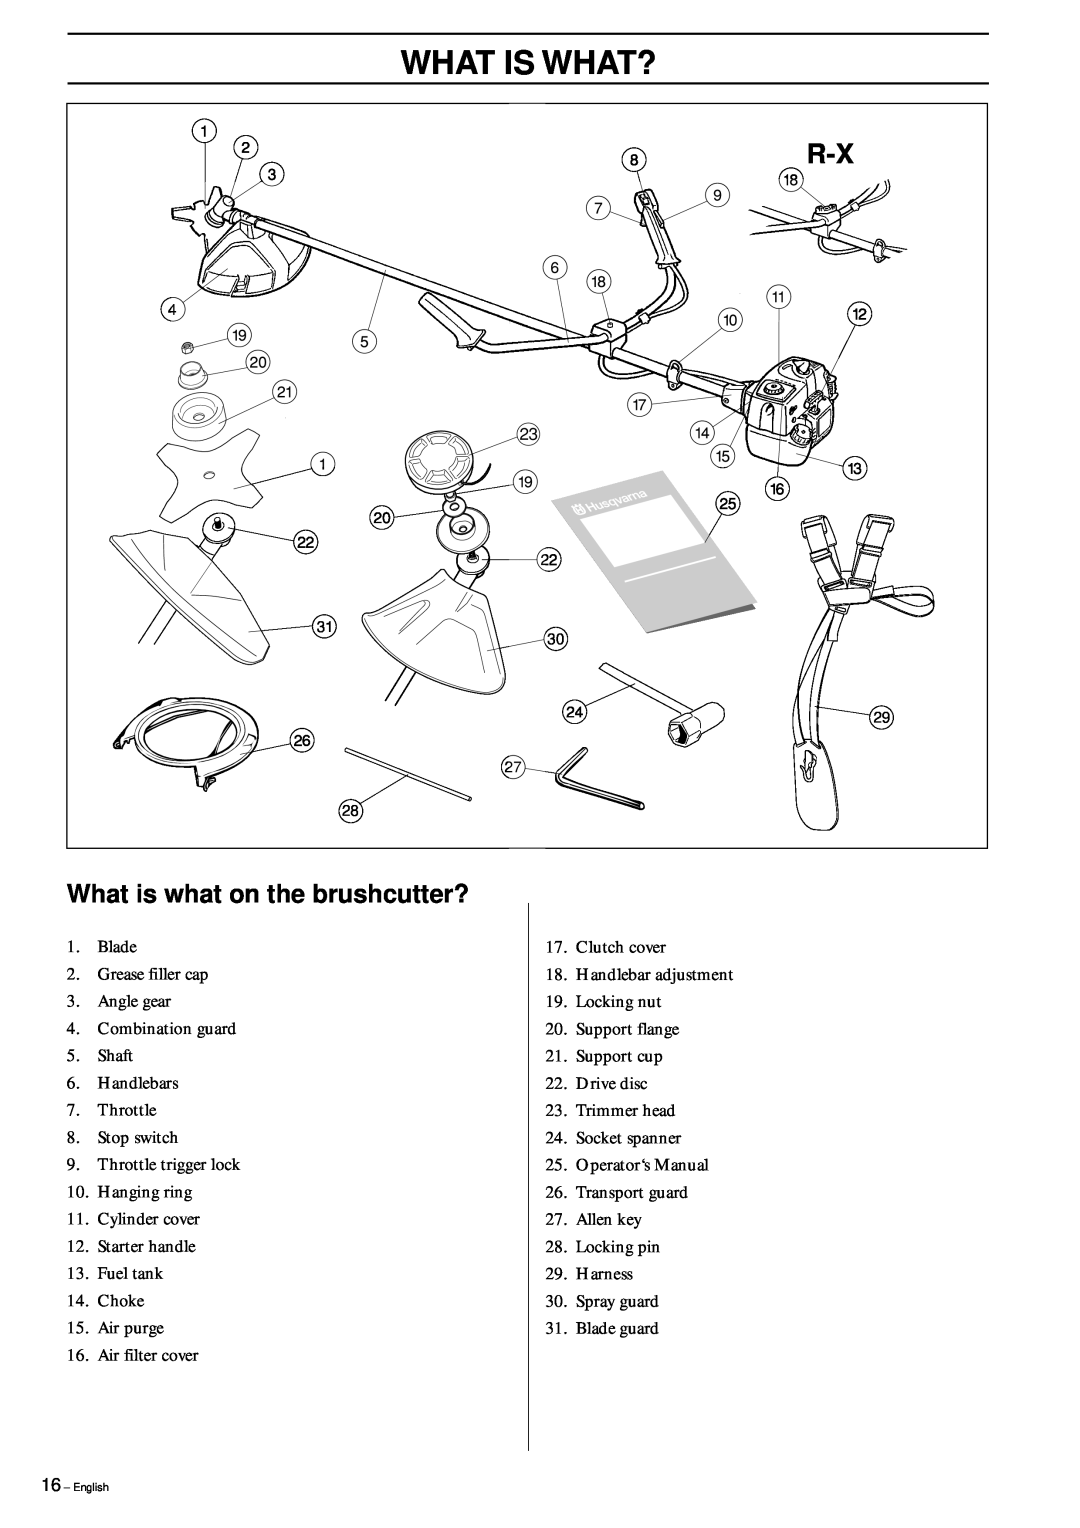 Husqvarna 326RX manual What Is What?, What is what on the brushcutter? 